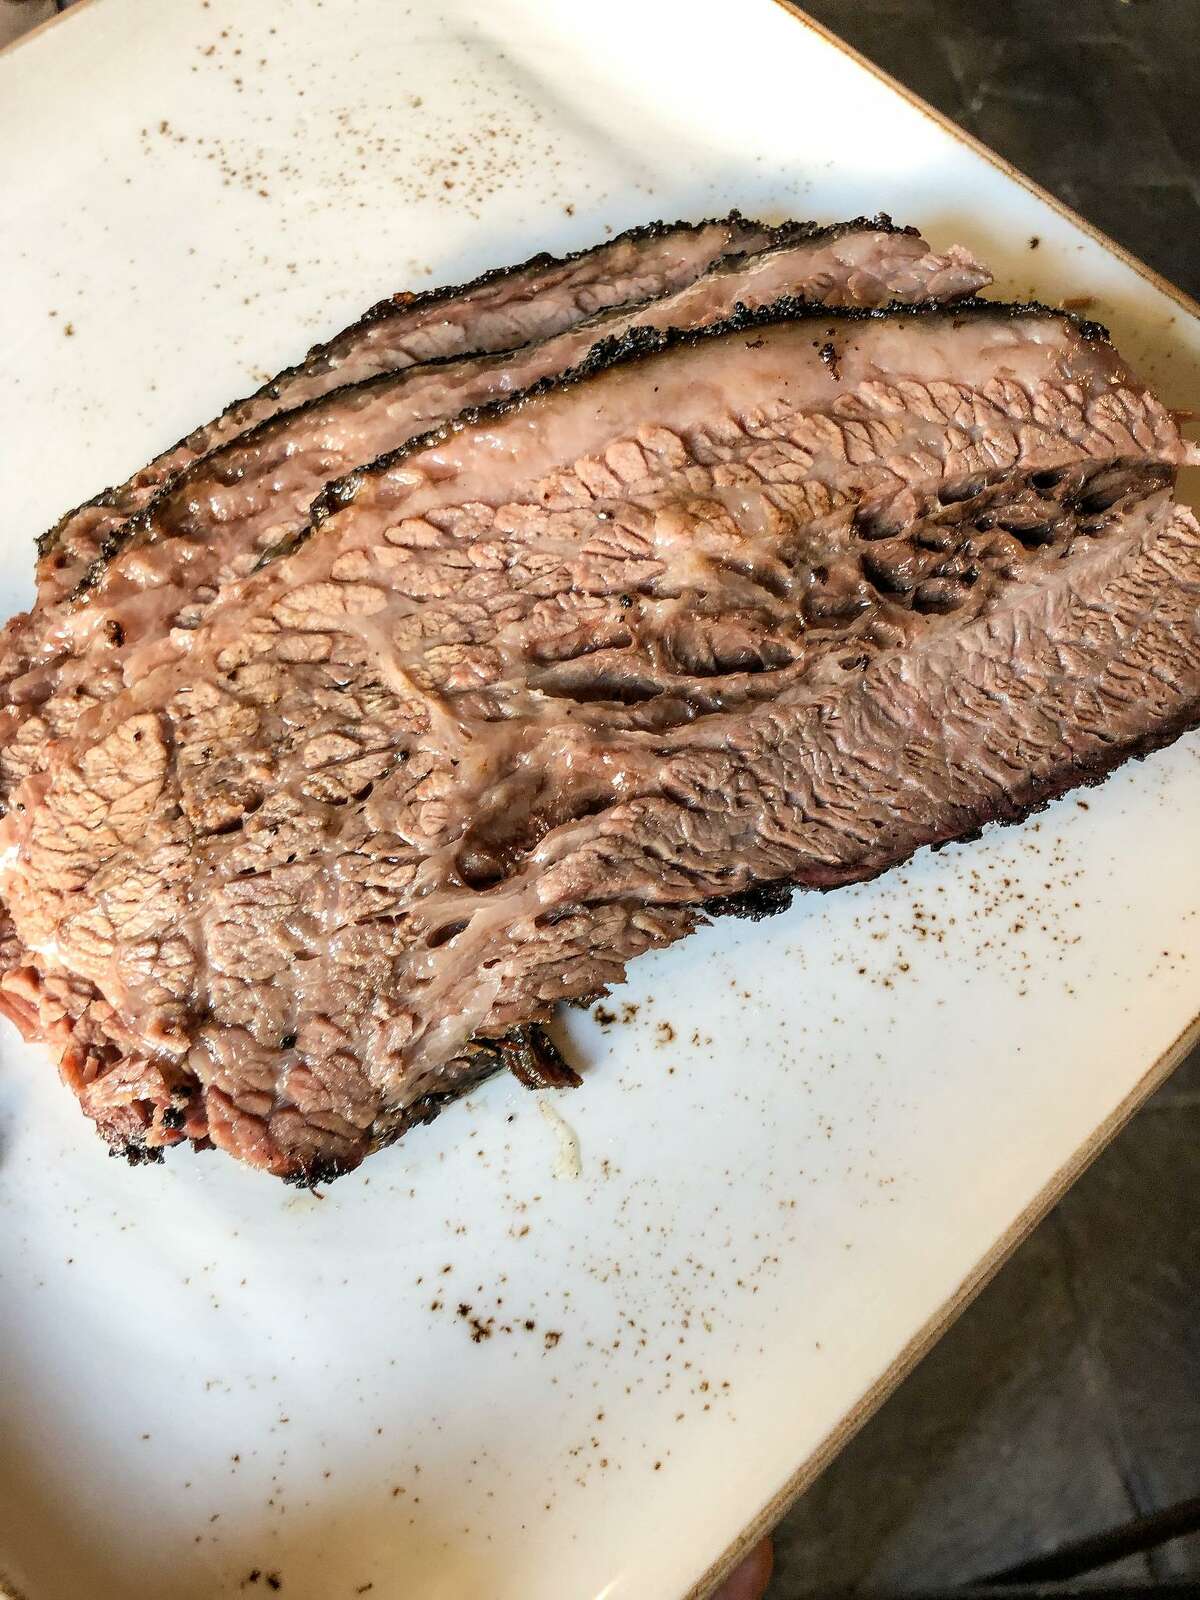 The owners of Blacket, a barbecue restaurant in Como, Italy, was inspired by a trip to Texas where the owners first tasted barbecue. Shown: brisket.